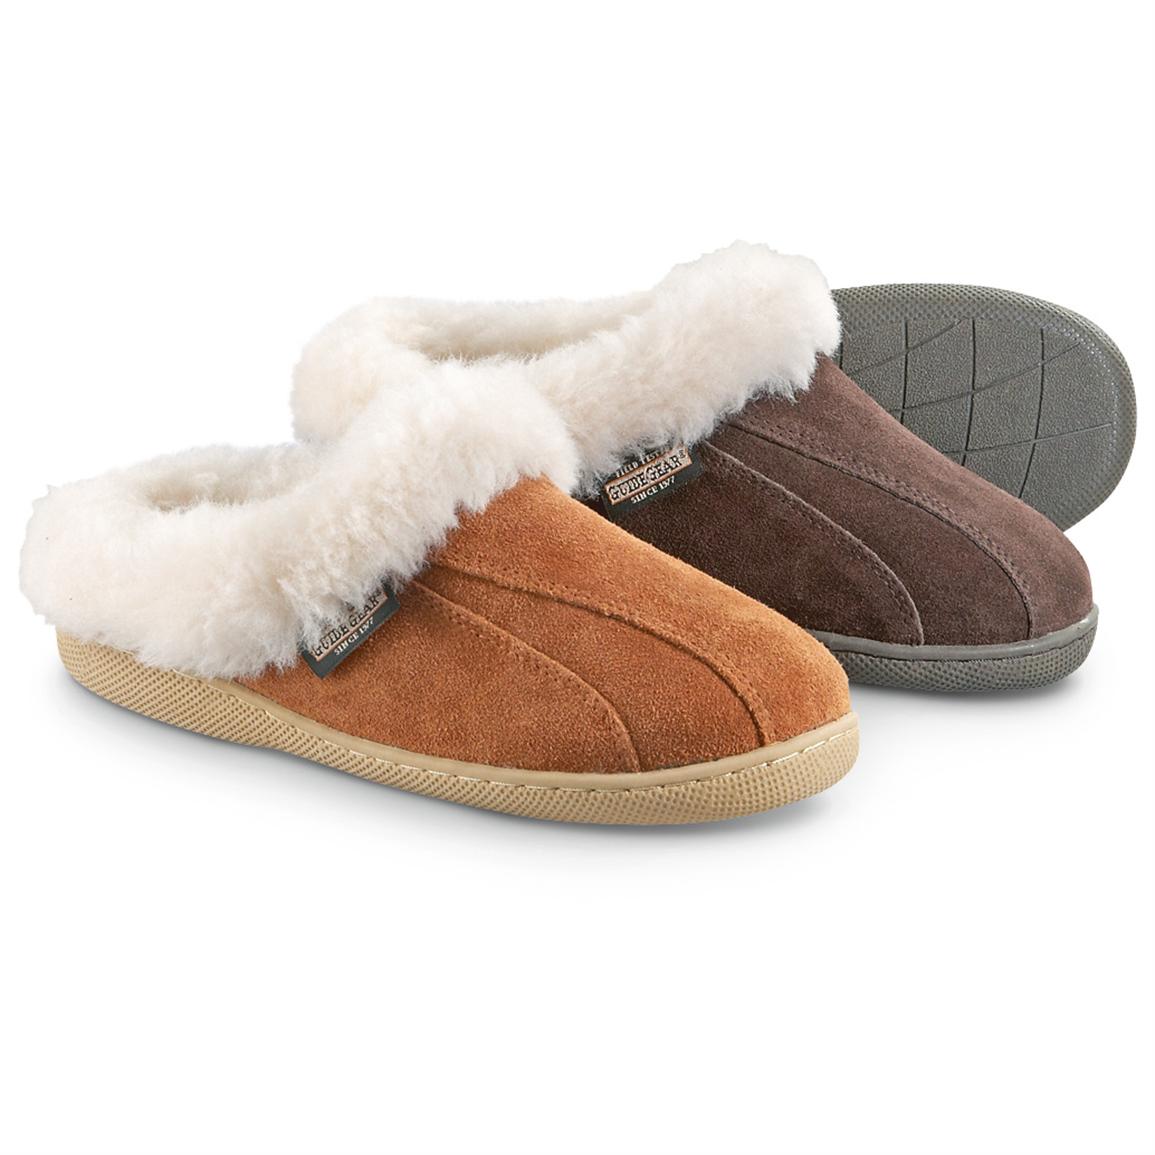 Women's Guide Gear® Shearling Clogs - 297707, Slippers at Sportsman's Guide